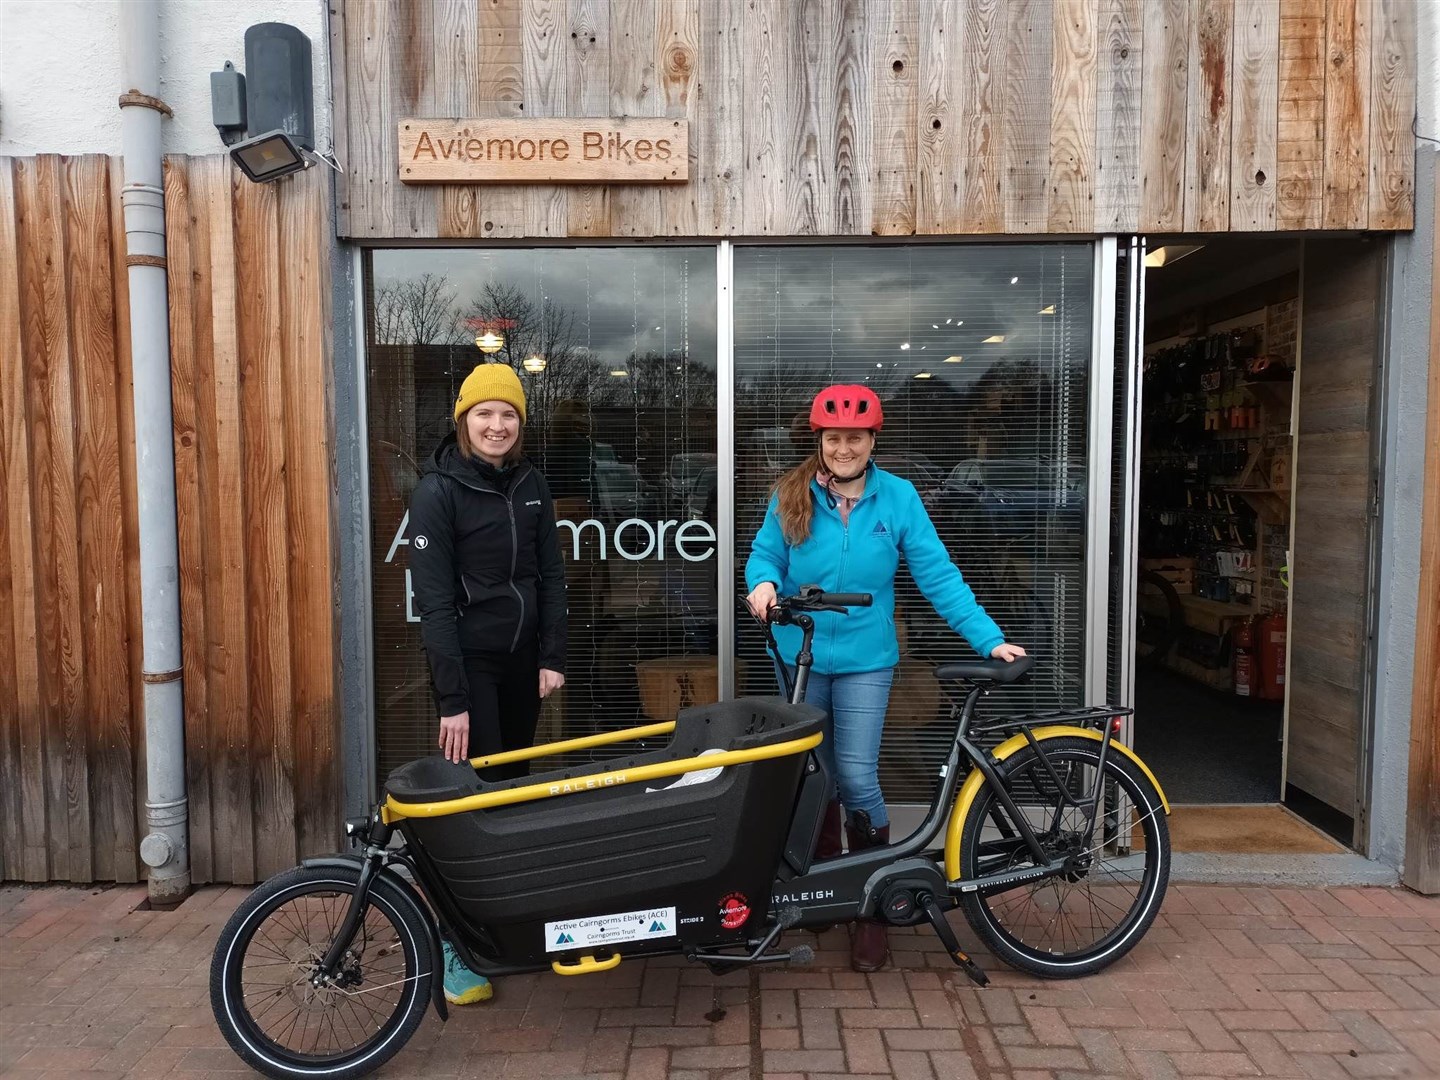 Sally Devlin, manager of Mikes Bikes, Aviemore, and Nancy Chambers from the Cairngorms Trust, are ACE representatives.